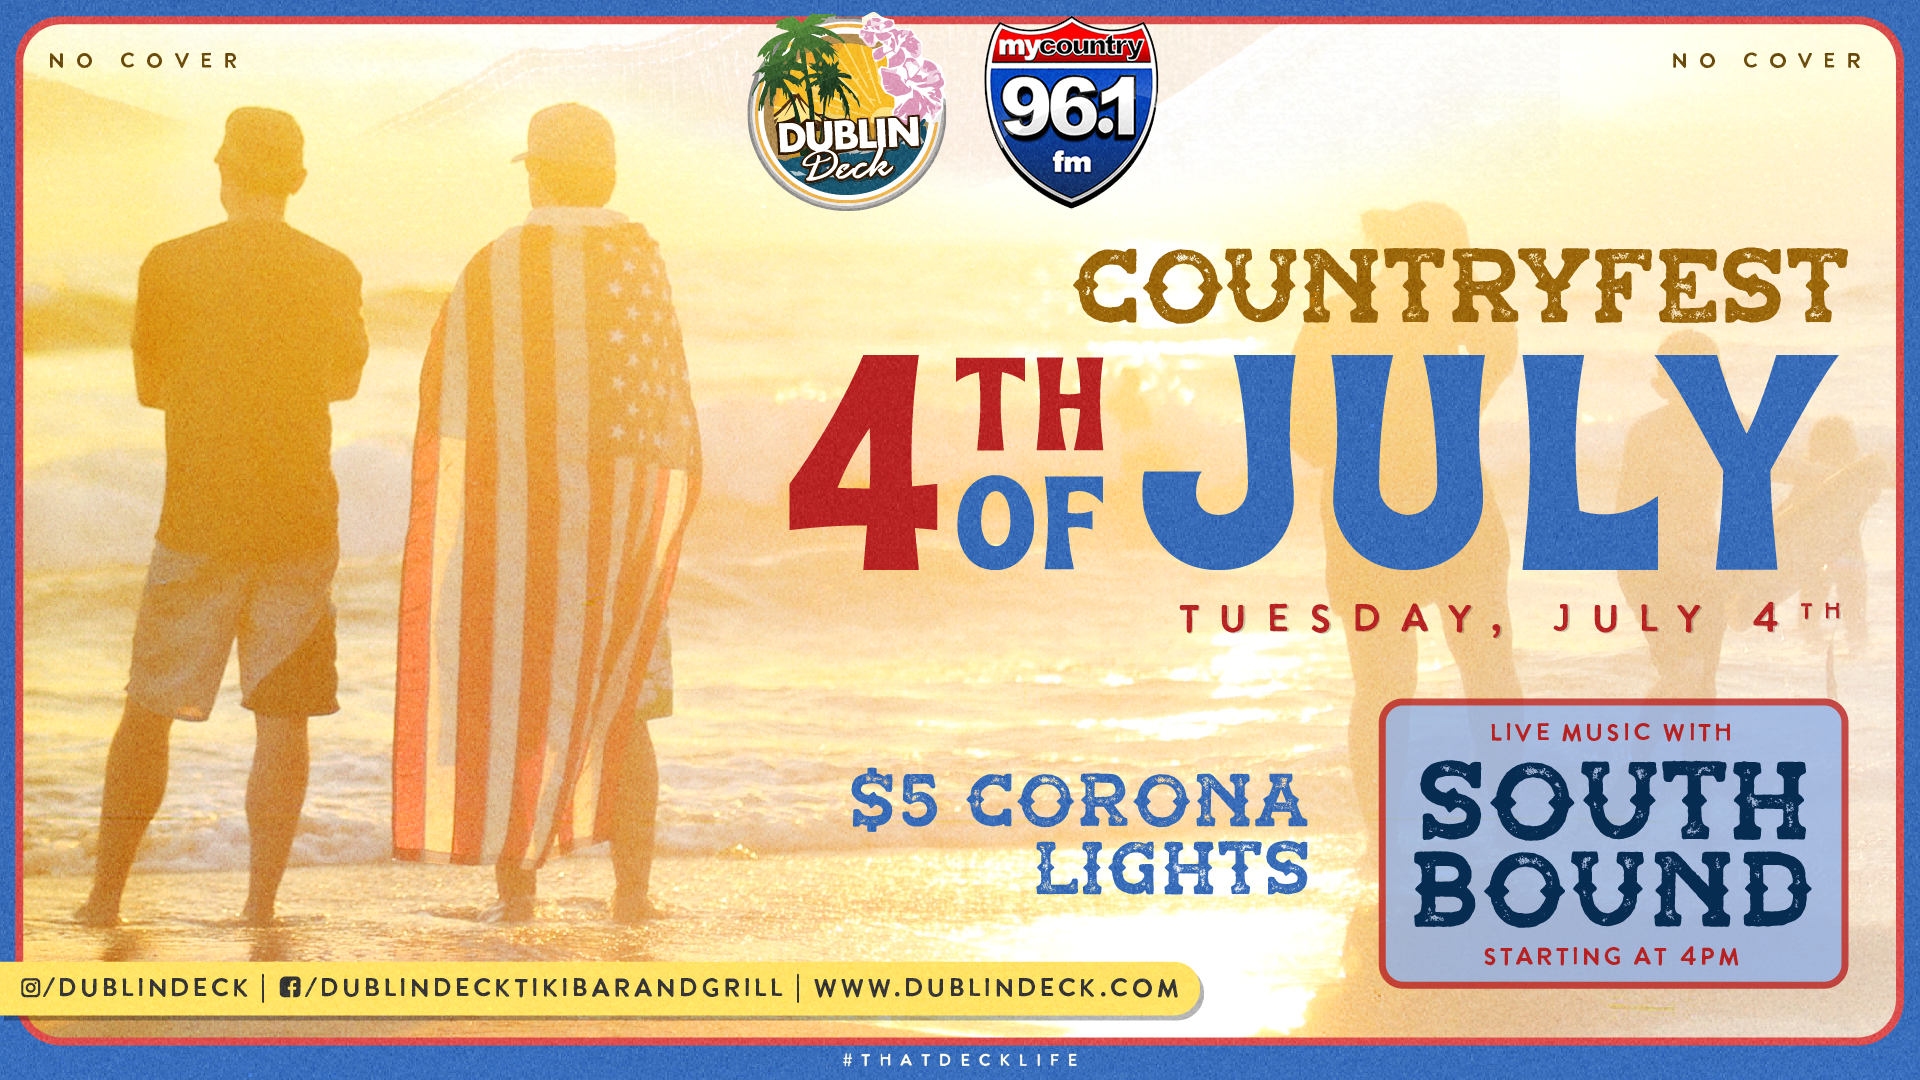 Celebrate the 4th of July at Dublin Deck with Southbound! Music begins at 4PM